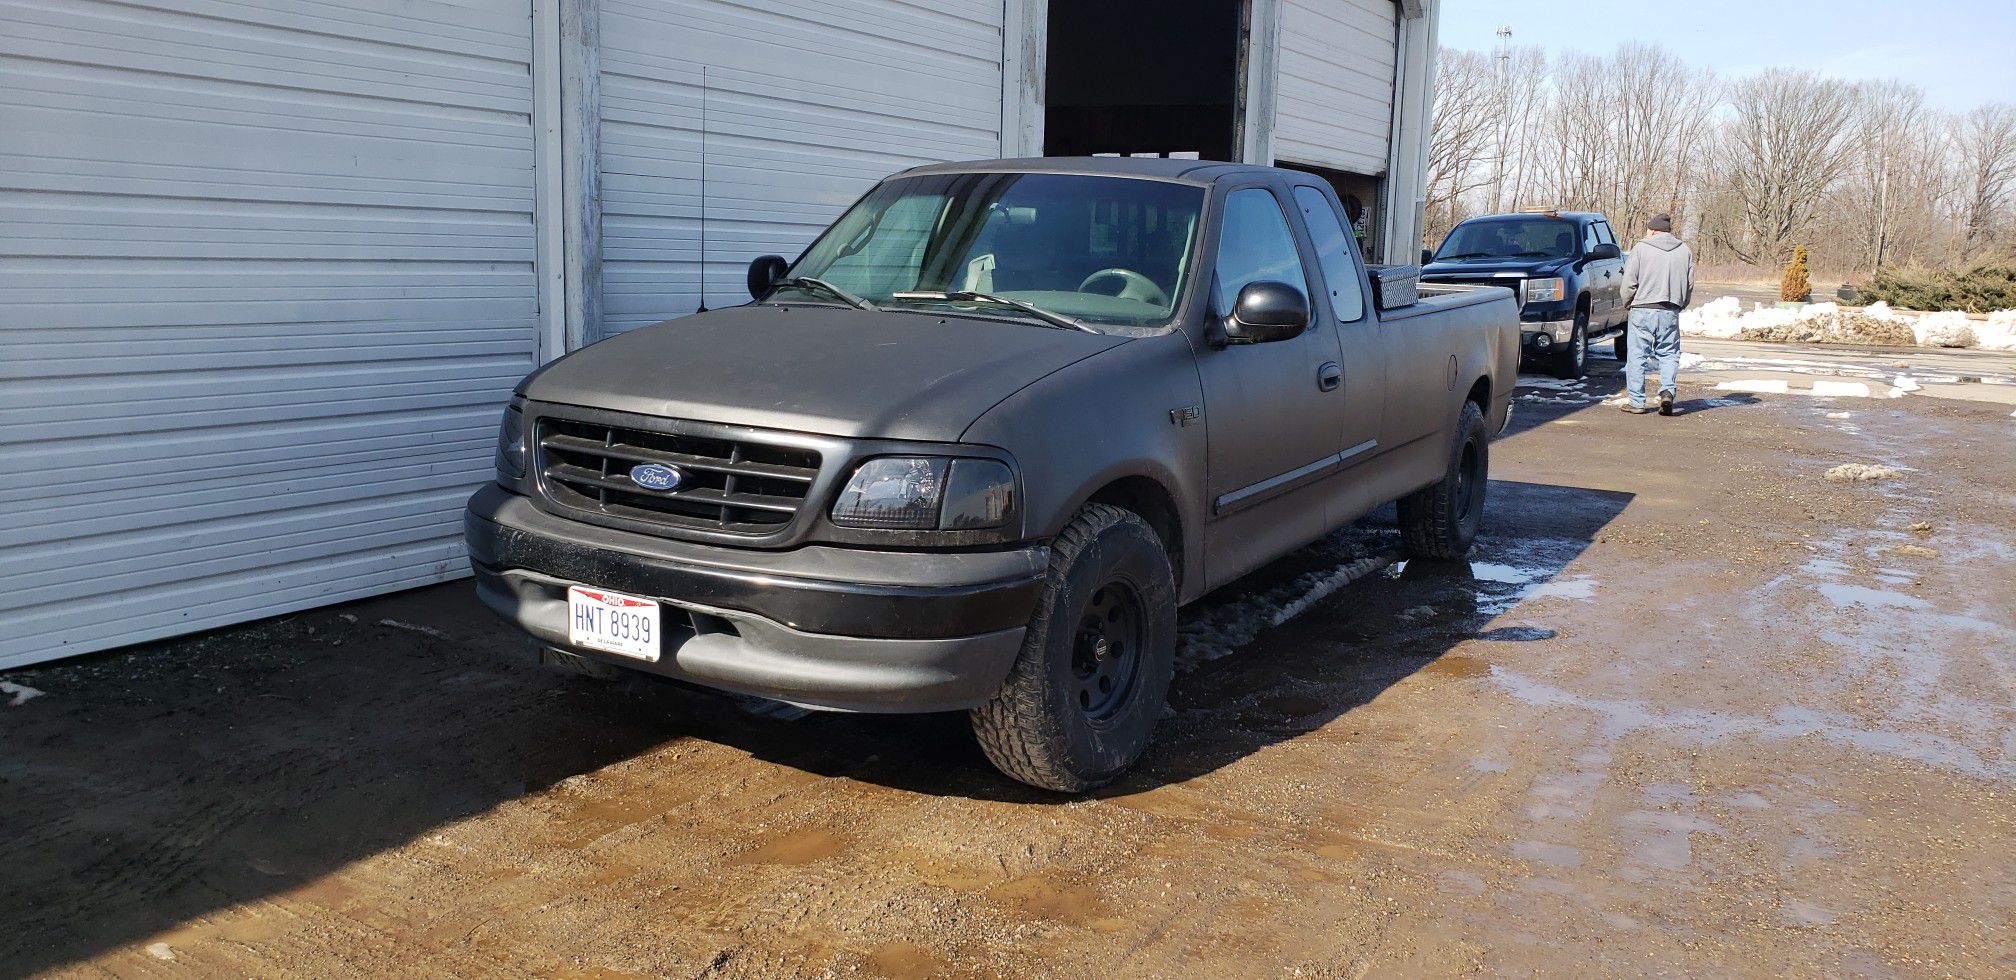 2001 ford f150